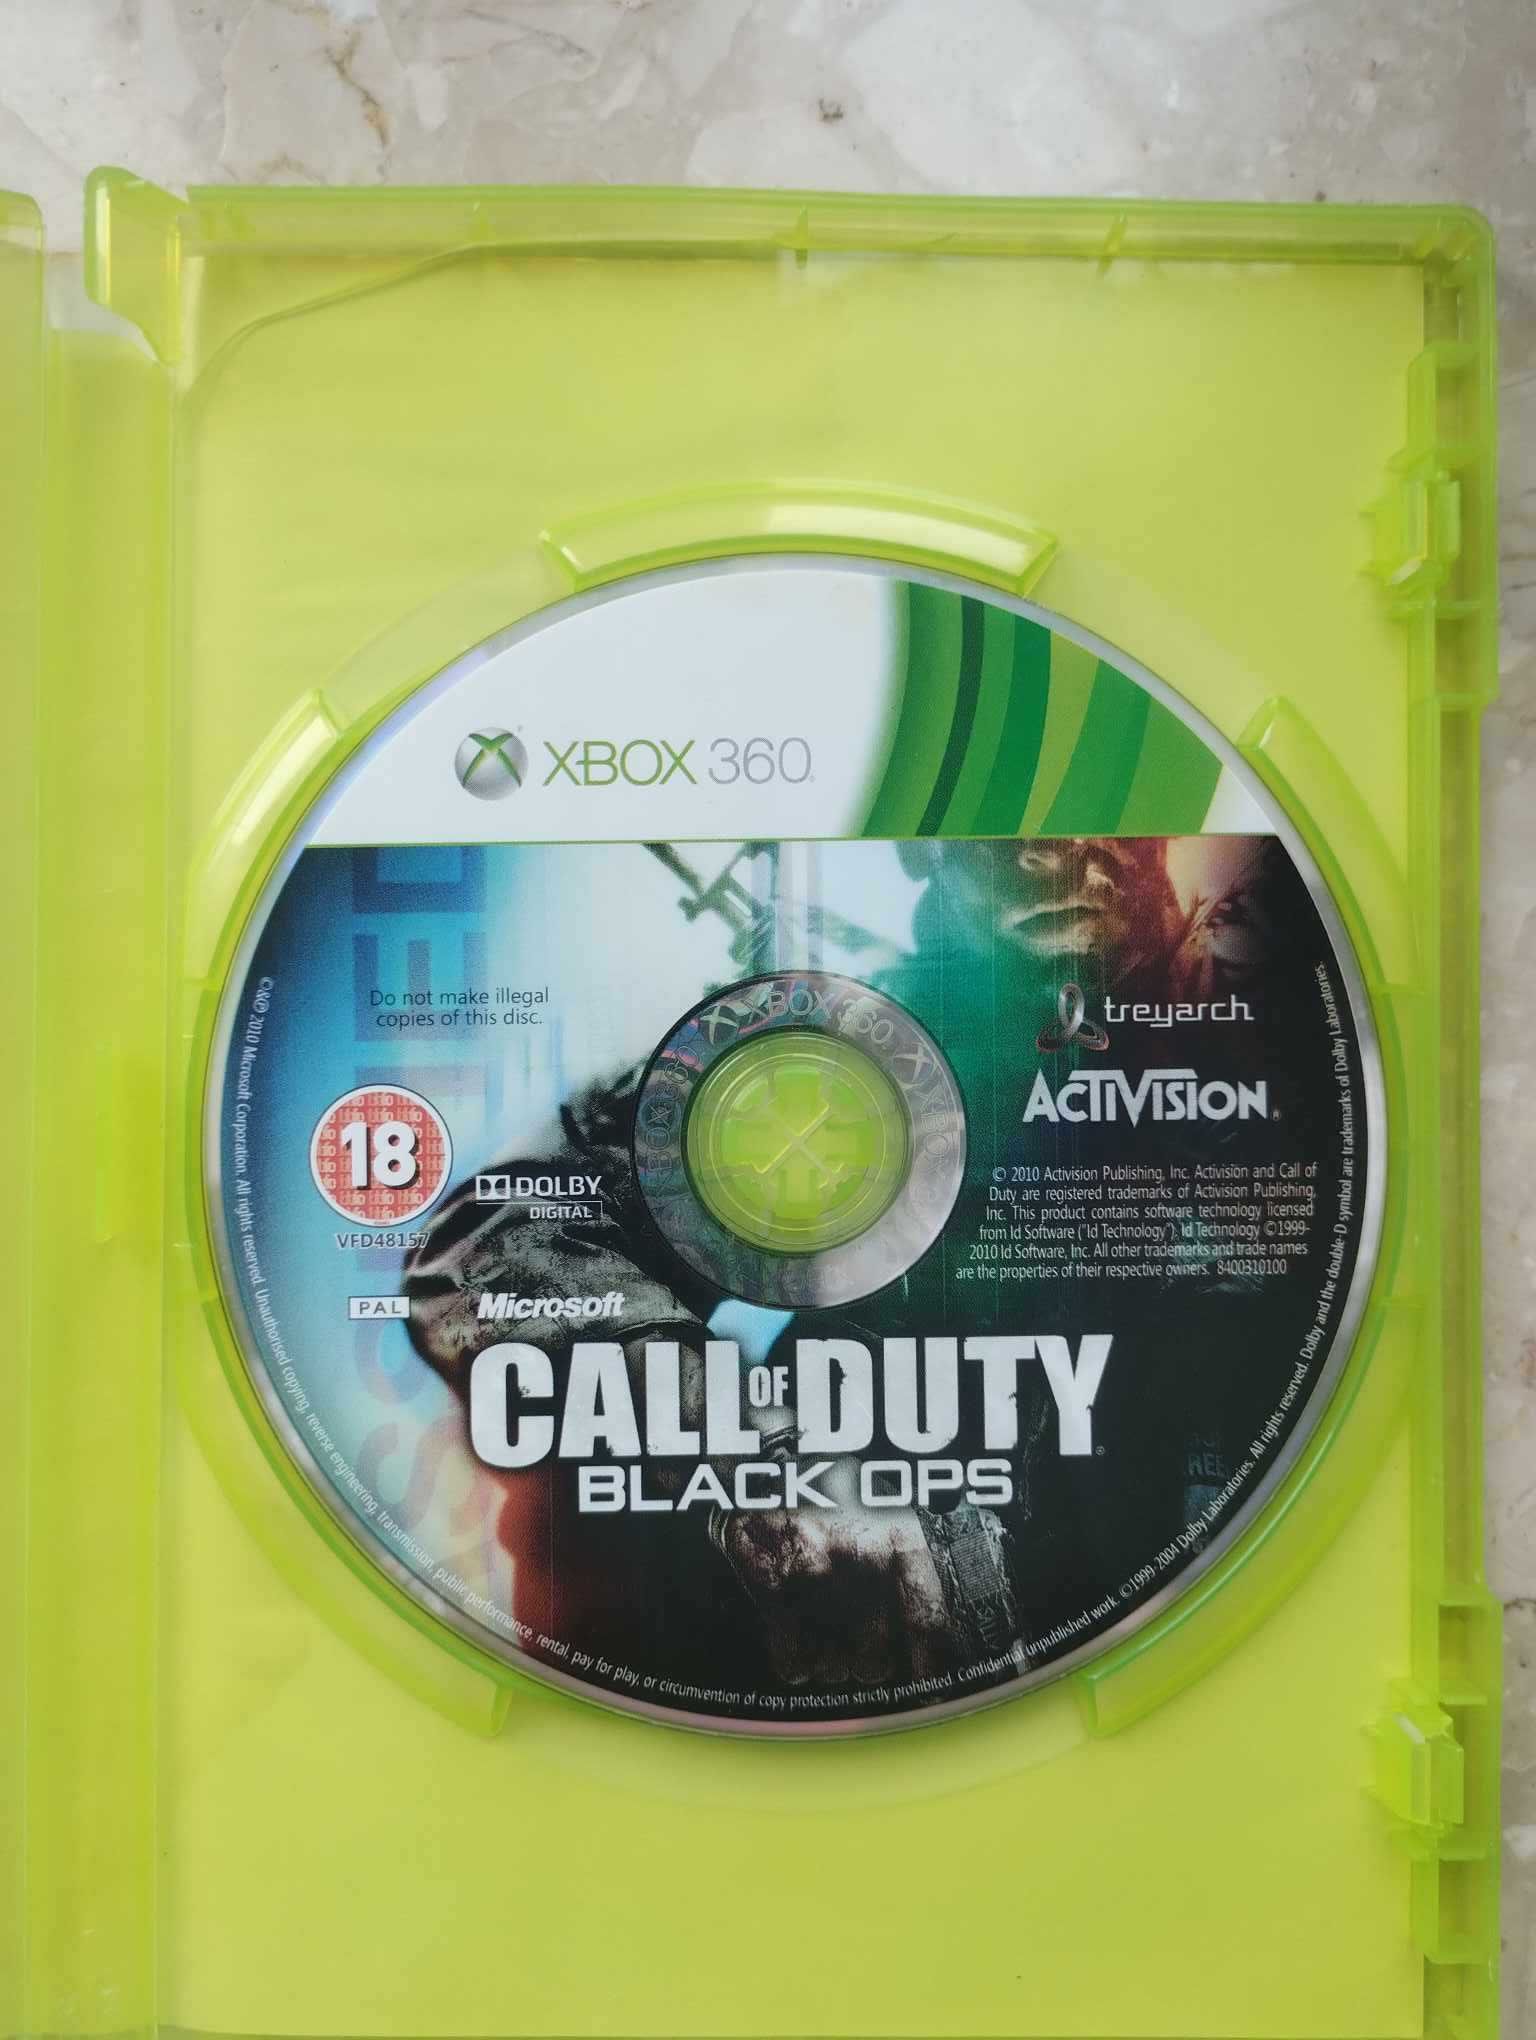 Call of duty: Black ops 1 Xbox 360